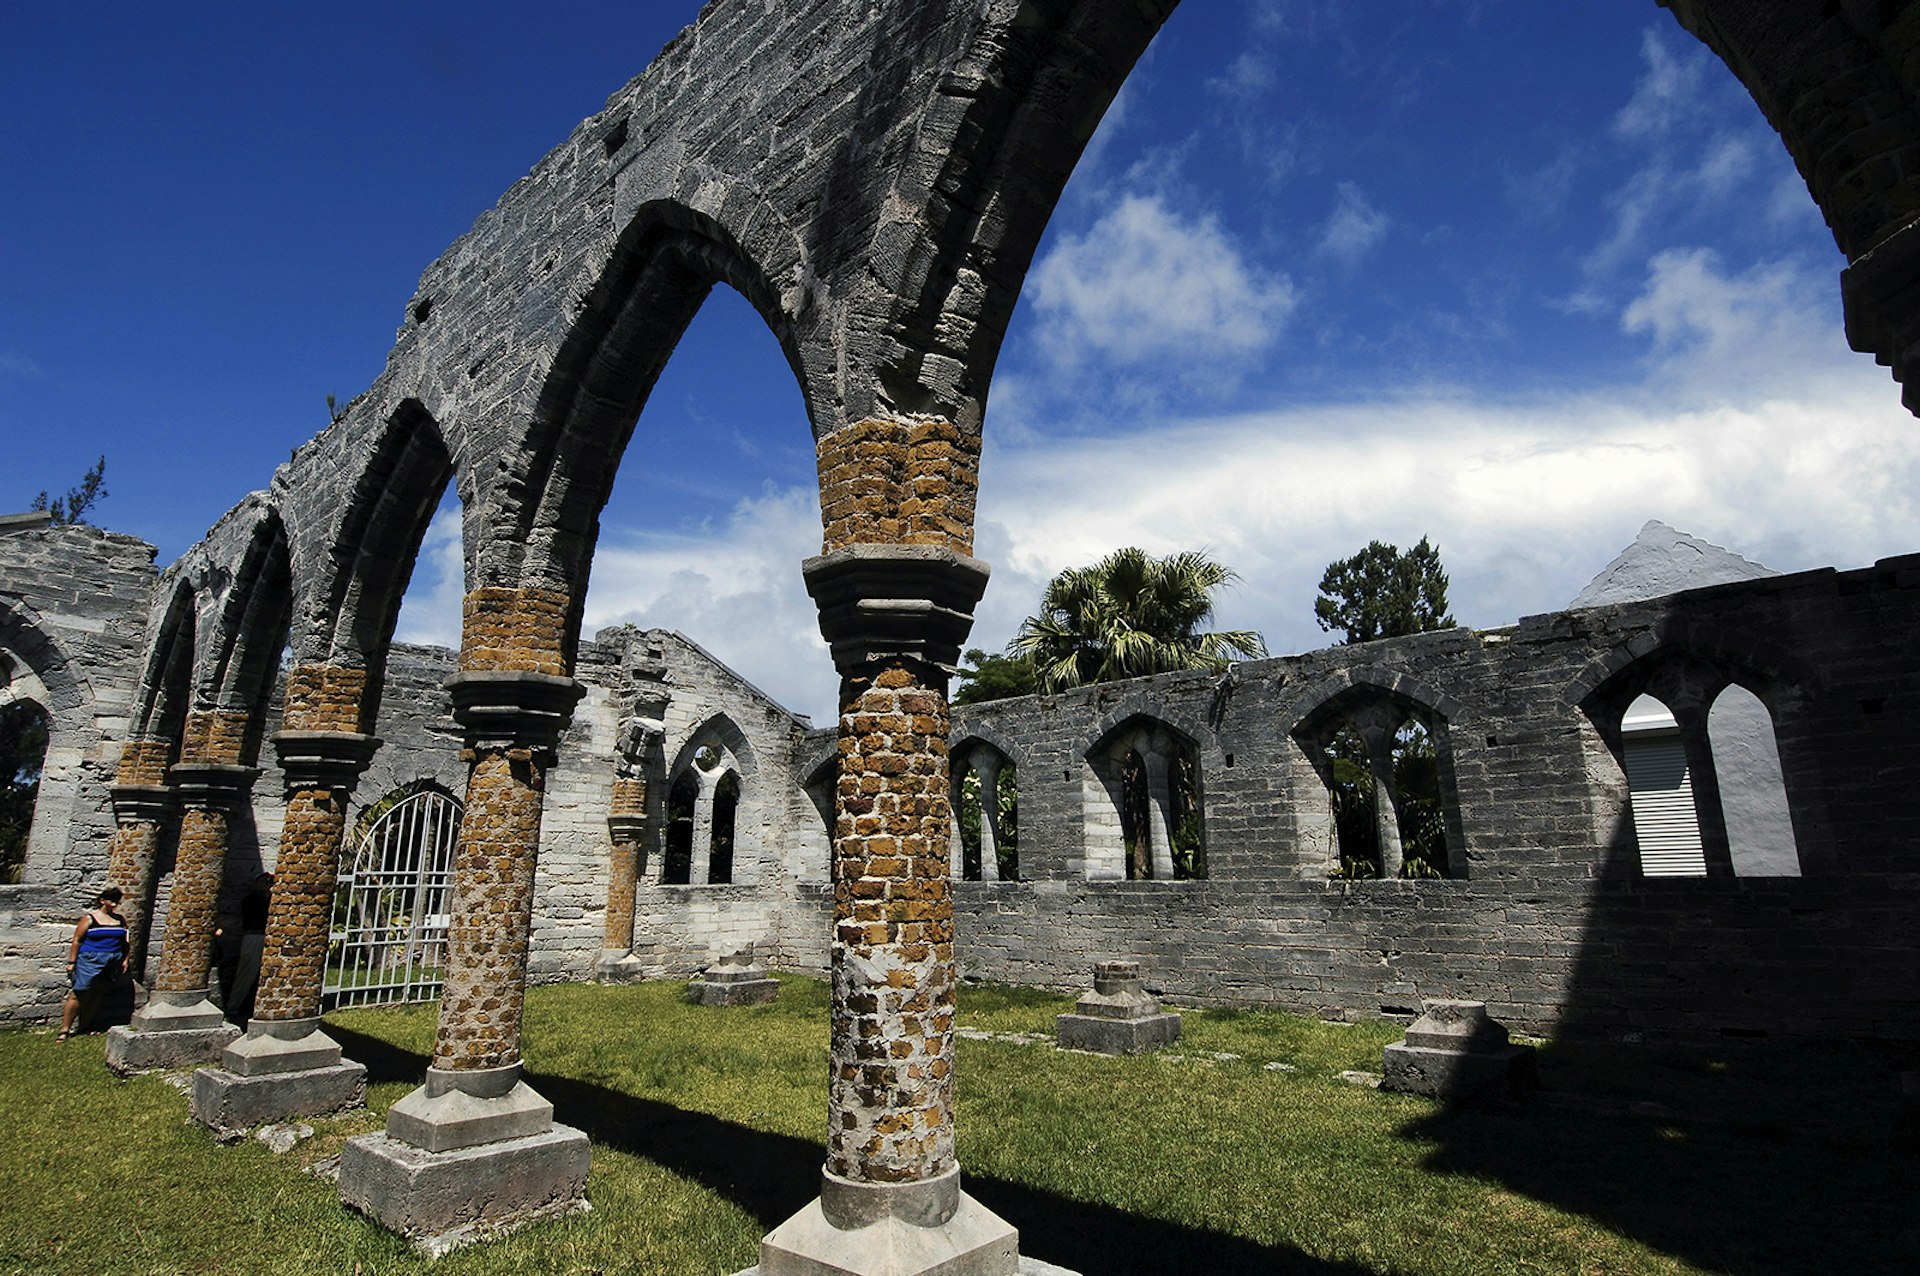 The Unfinished Church on St George's Island © DEA / G. SOSIO / Getty Images